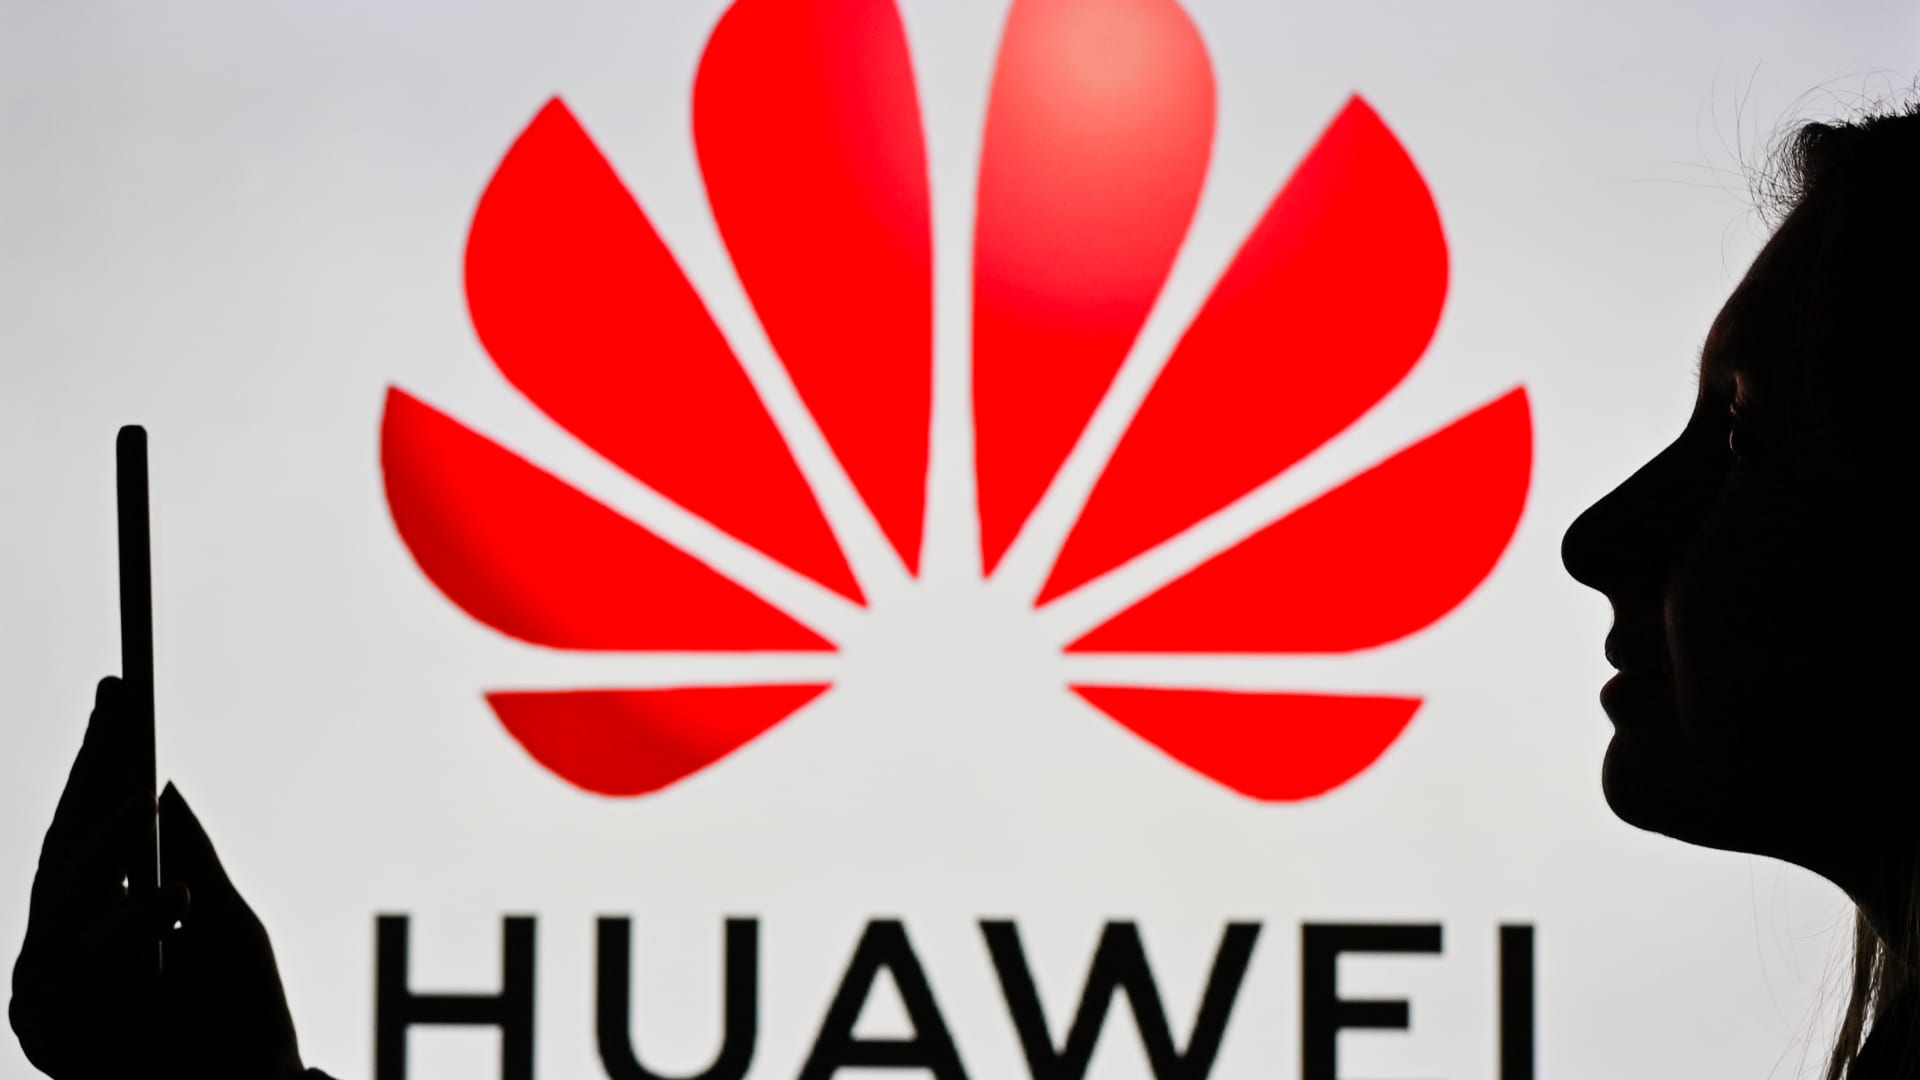 Photo of Huawei reportedly says it has developed domestic chip design tools despite U.S. sanctions